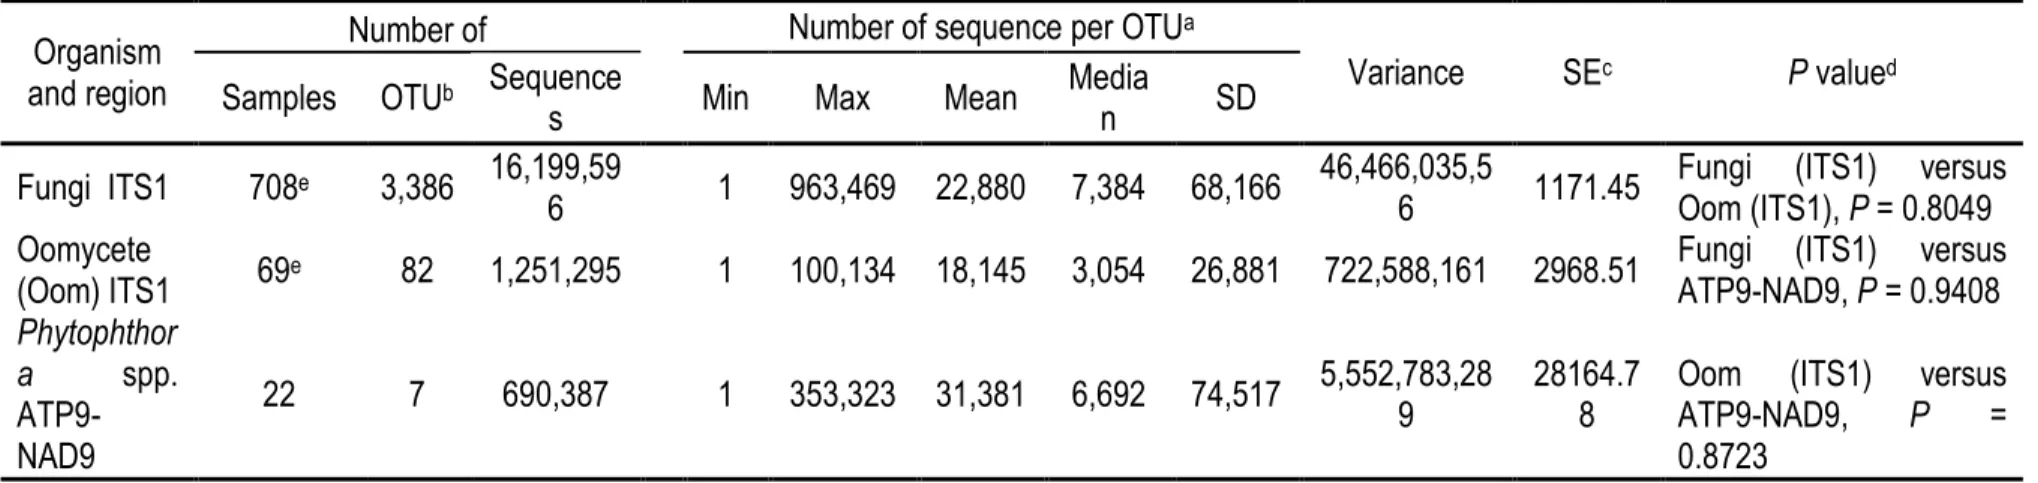 Table 2.3 Organism sequences and operational taxonomic units (OTU) counts produced from Ion Torrent Personal Genome Machine next-next-1 